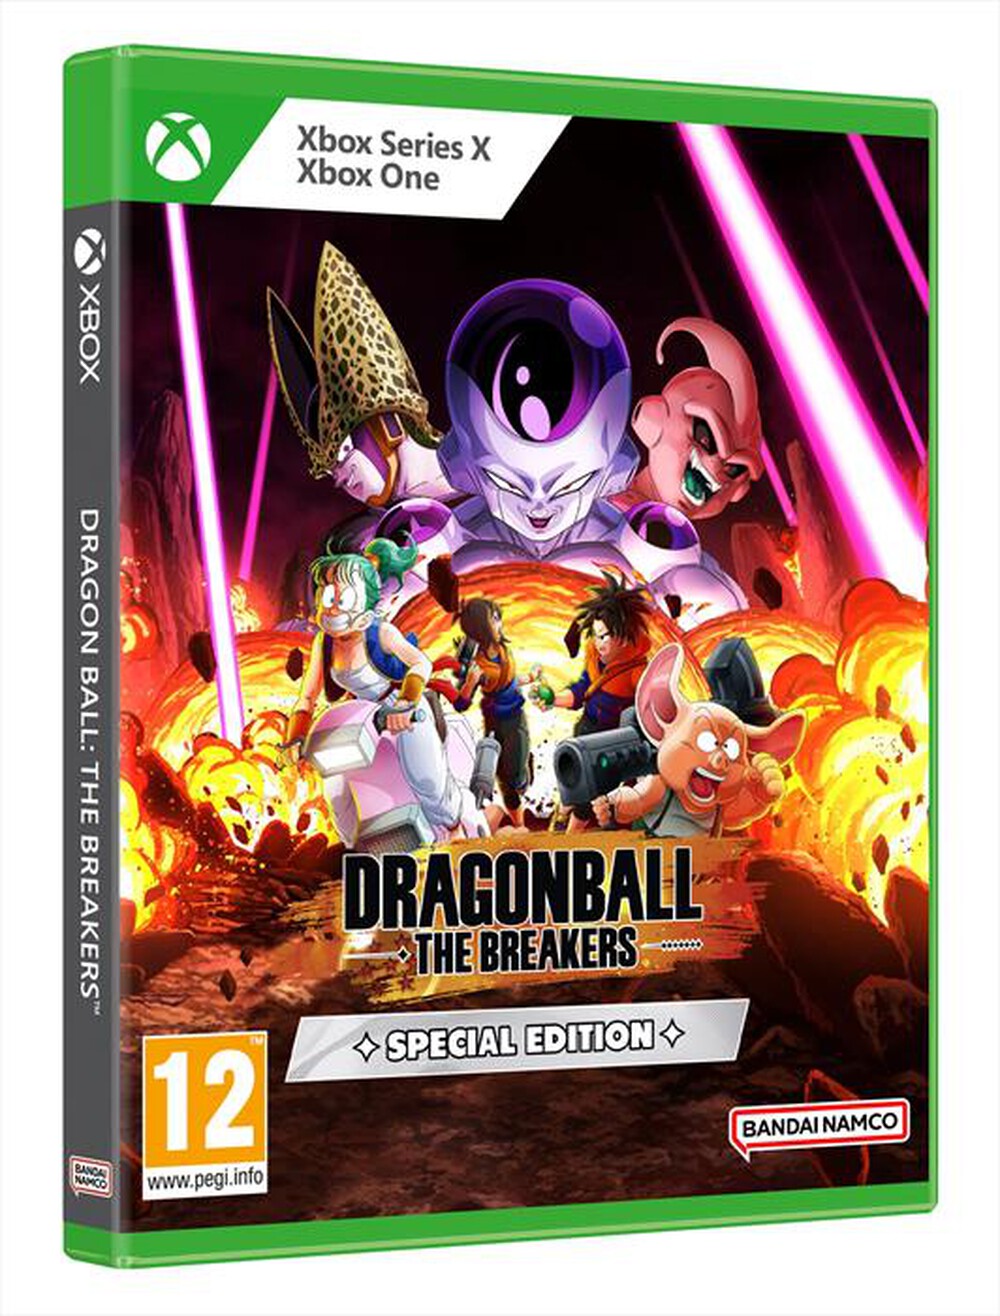 "NAMCO - DRAGON BALL: THE BREAKERS SPECIAL EDITION XBOX"